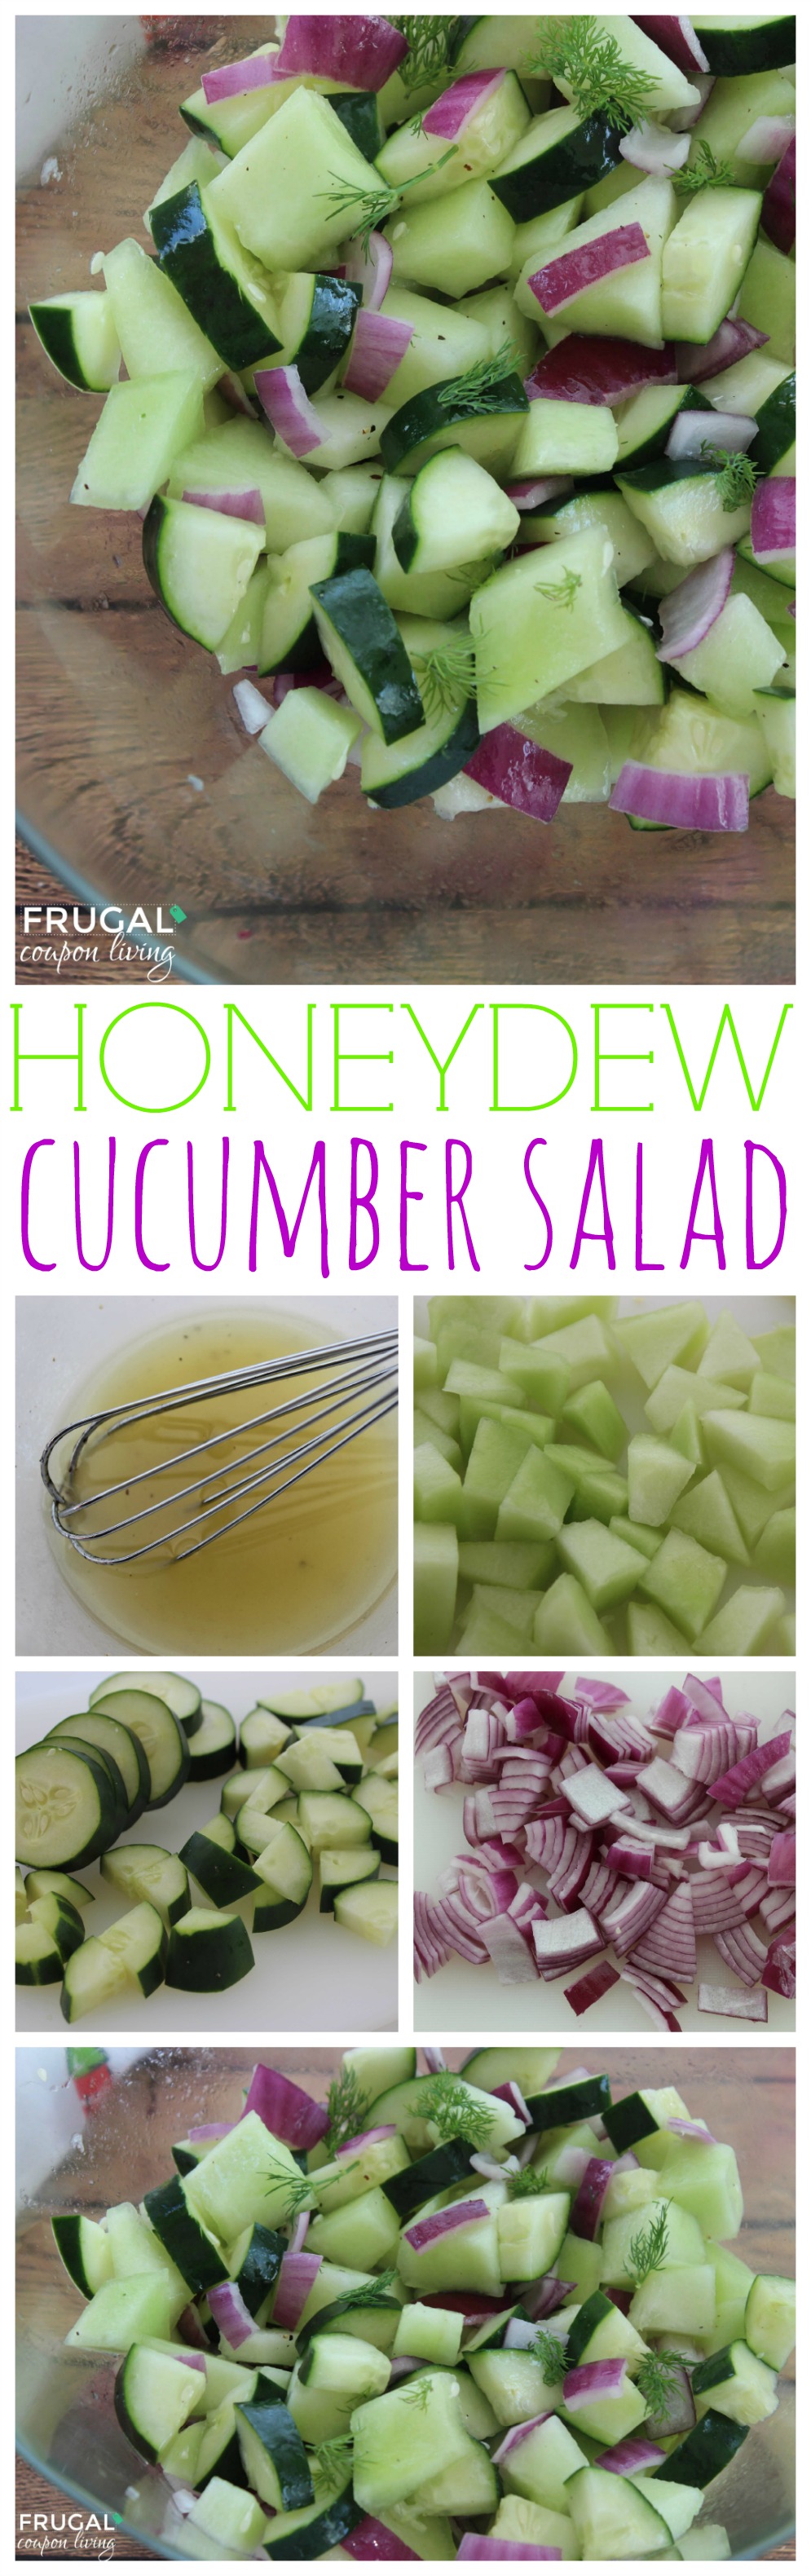 honeydew-cucumber-salad-Collage-frugal-coupon-living